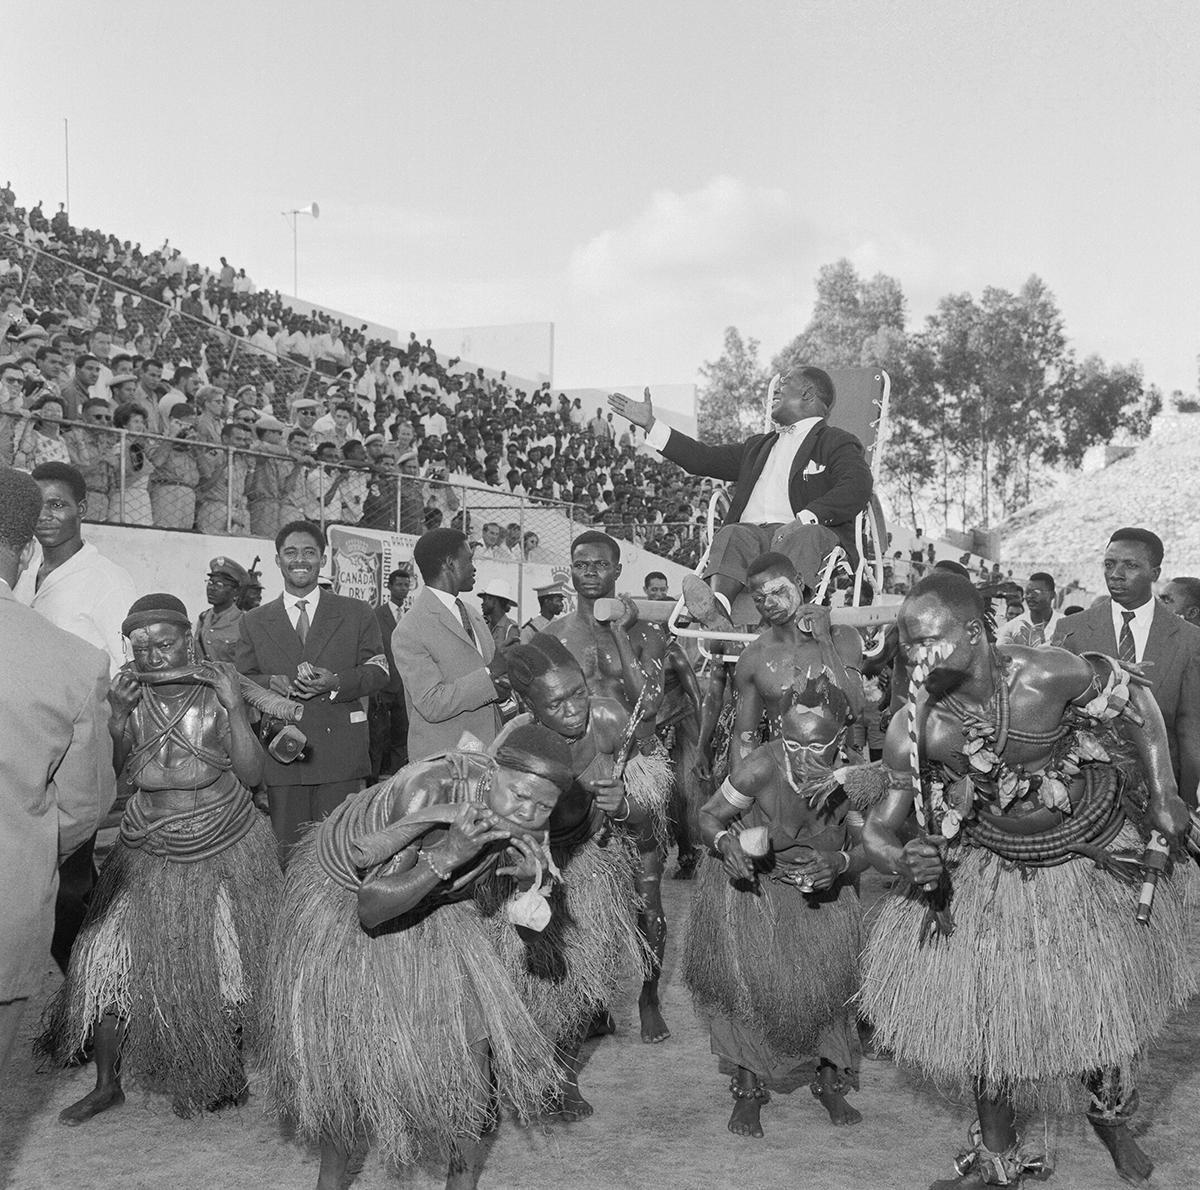 Armstrong is carried in triumph to the Baudouin stadium in Brazzaville during his Africa Tour